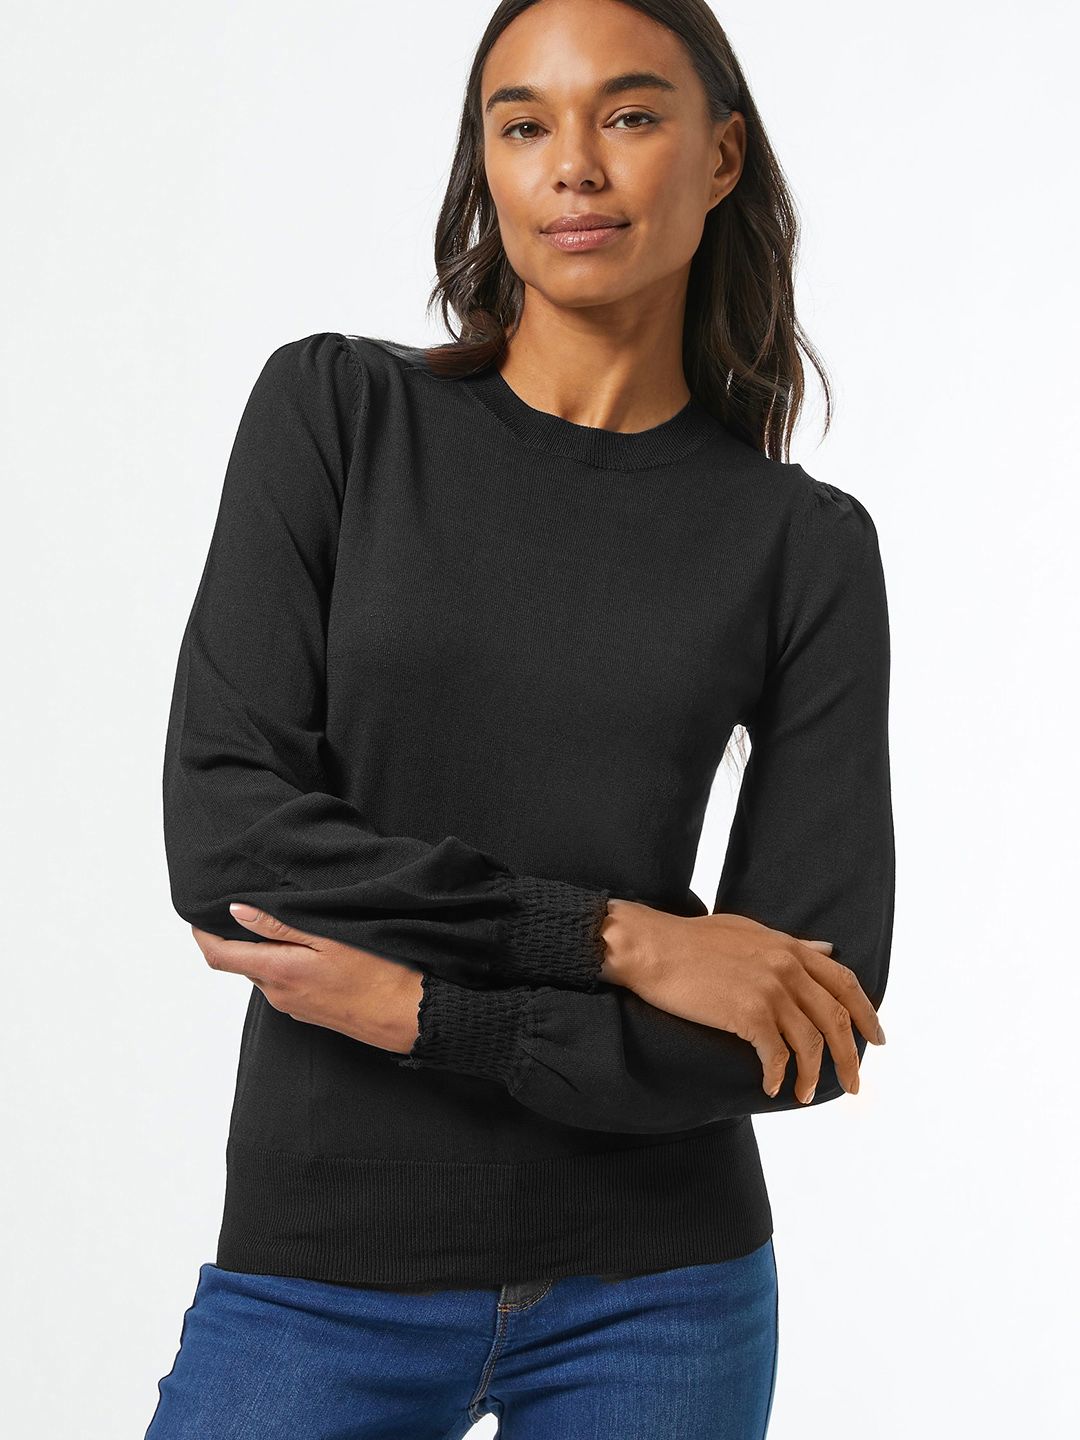 DOROTHY PERKINS Women Black Solid Pullover Sweater Price in India